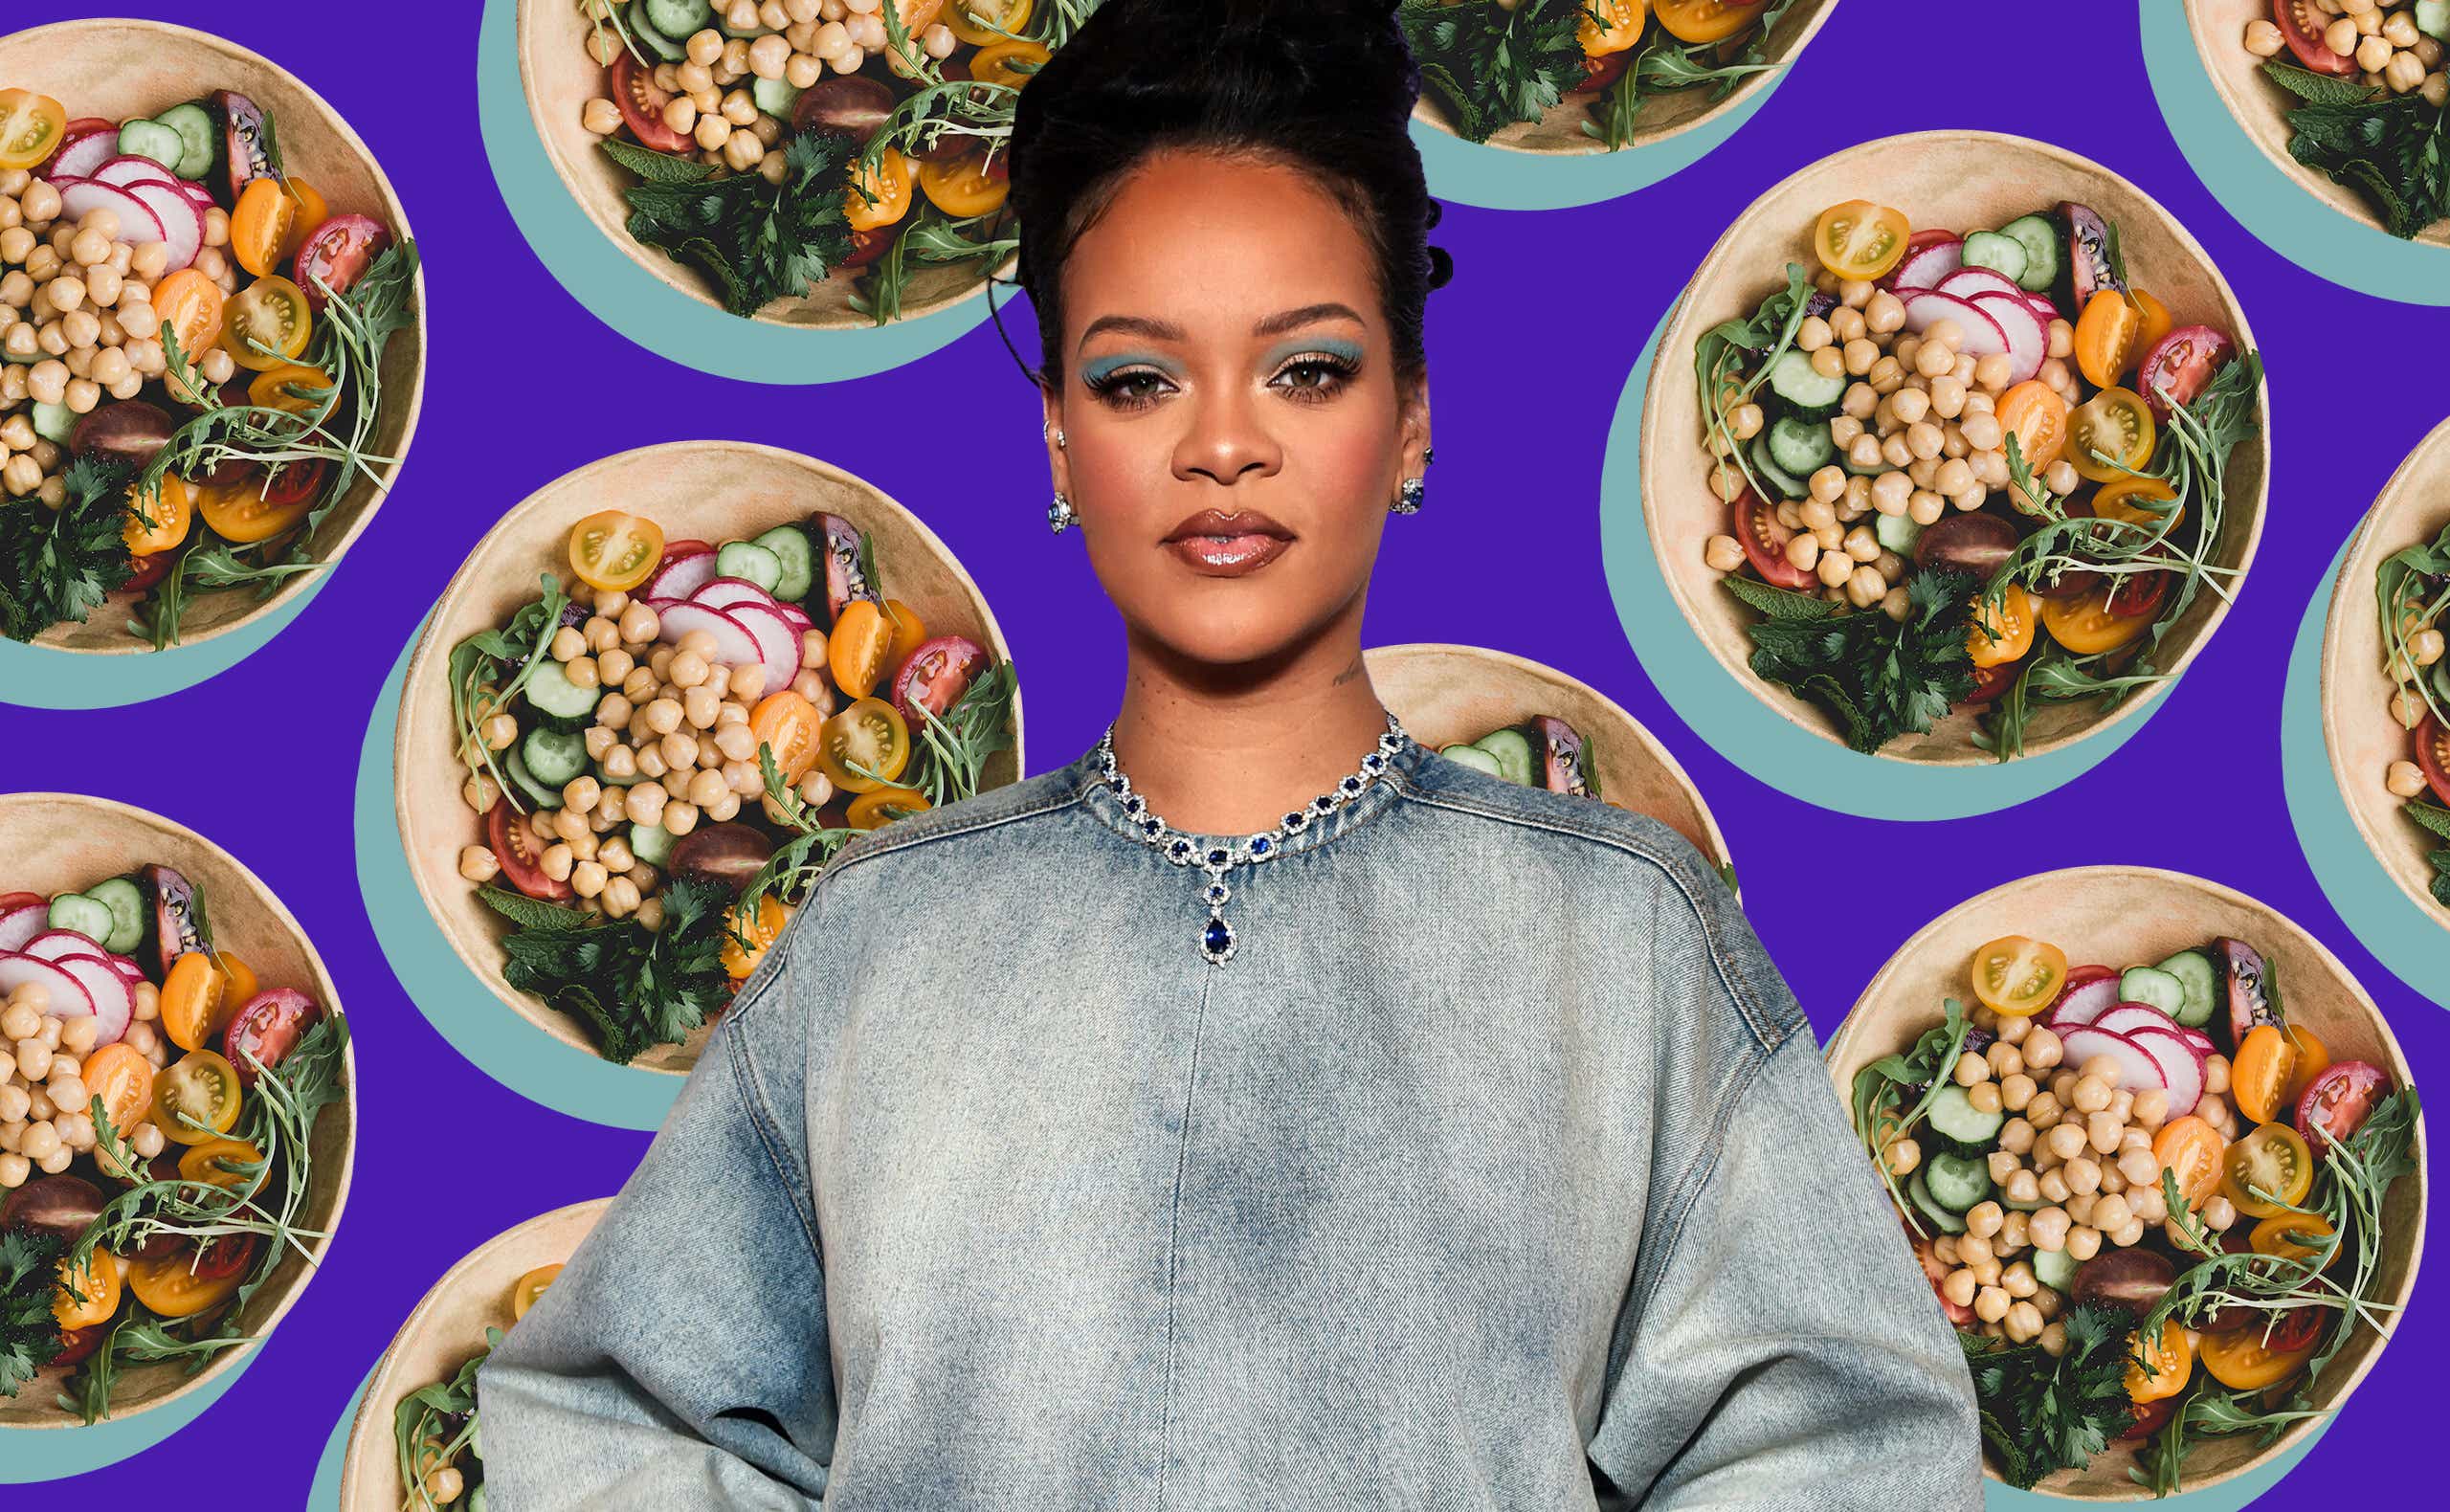 Rihanna poses in front of salads